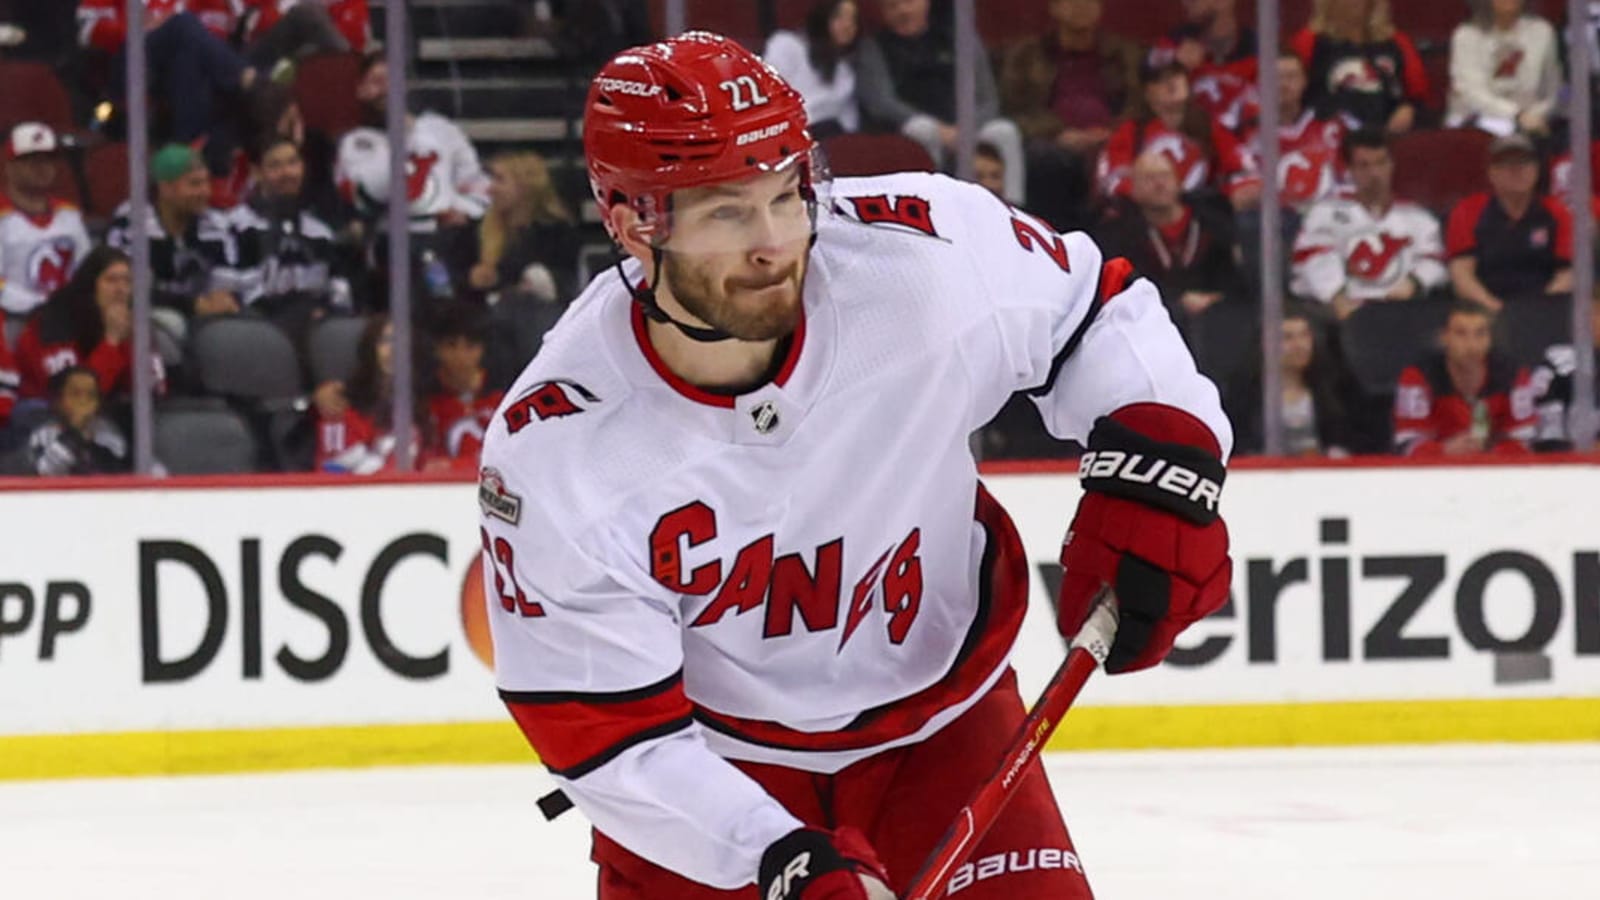 Hurricanes defenseman out 'way more' than week-to-week with lower-body injury